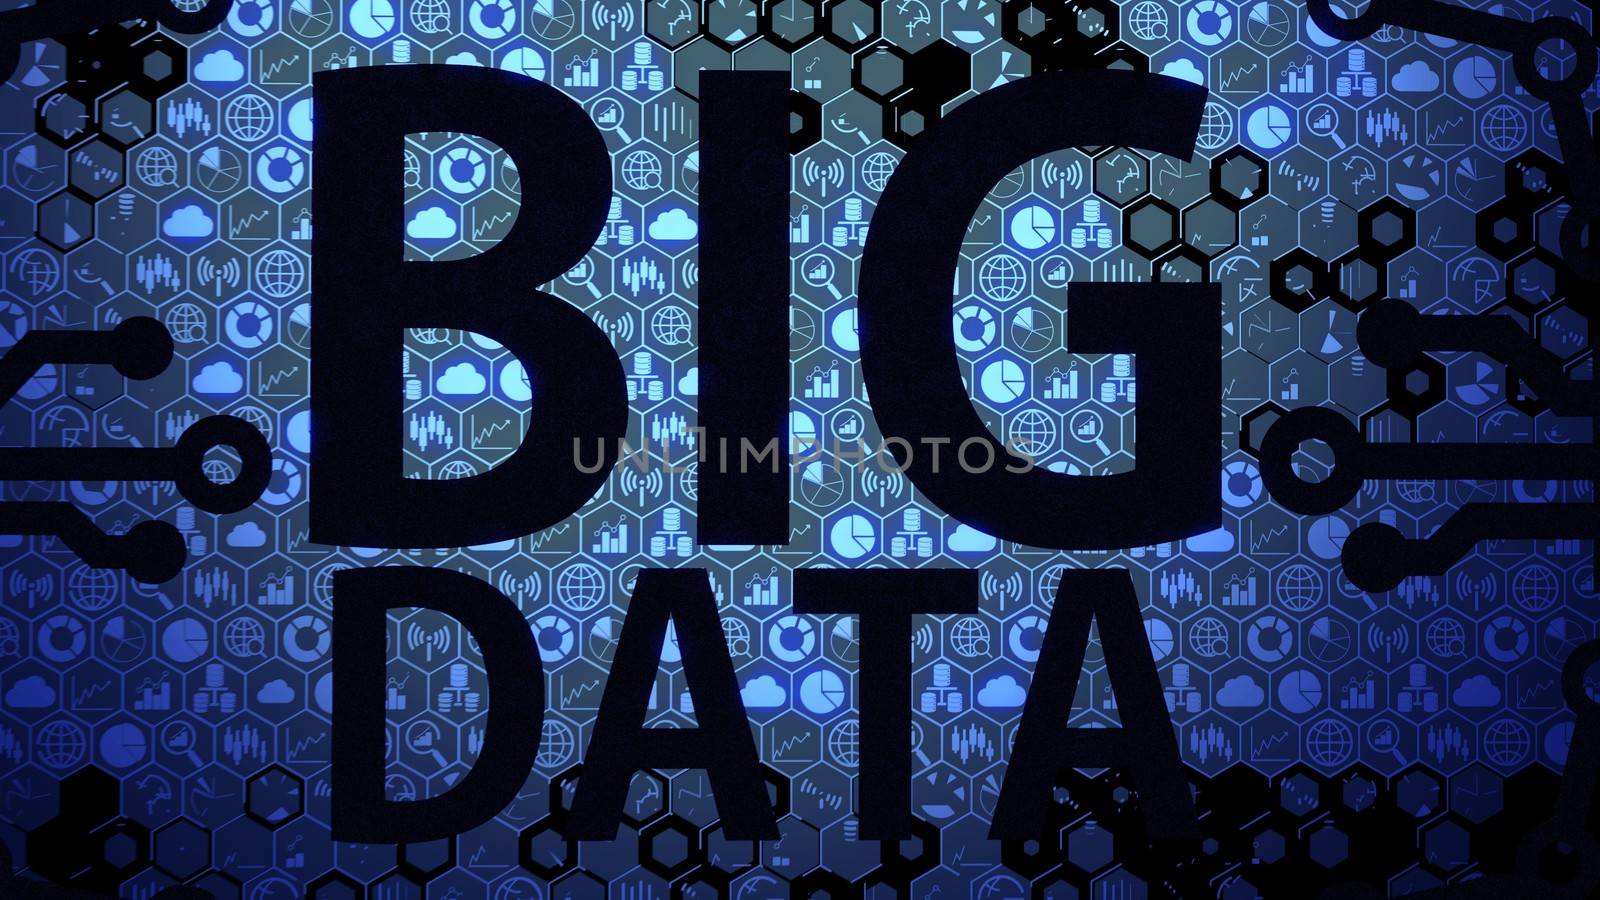 Big Data Big Picture Background Composed of Big Data Icons and Big Data Text with Blue Light Ver.2 of 4 by ariya23156